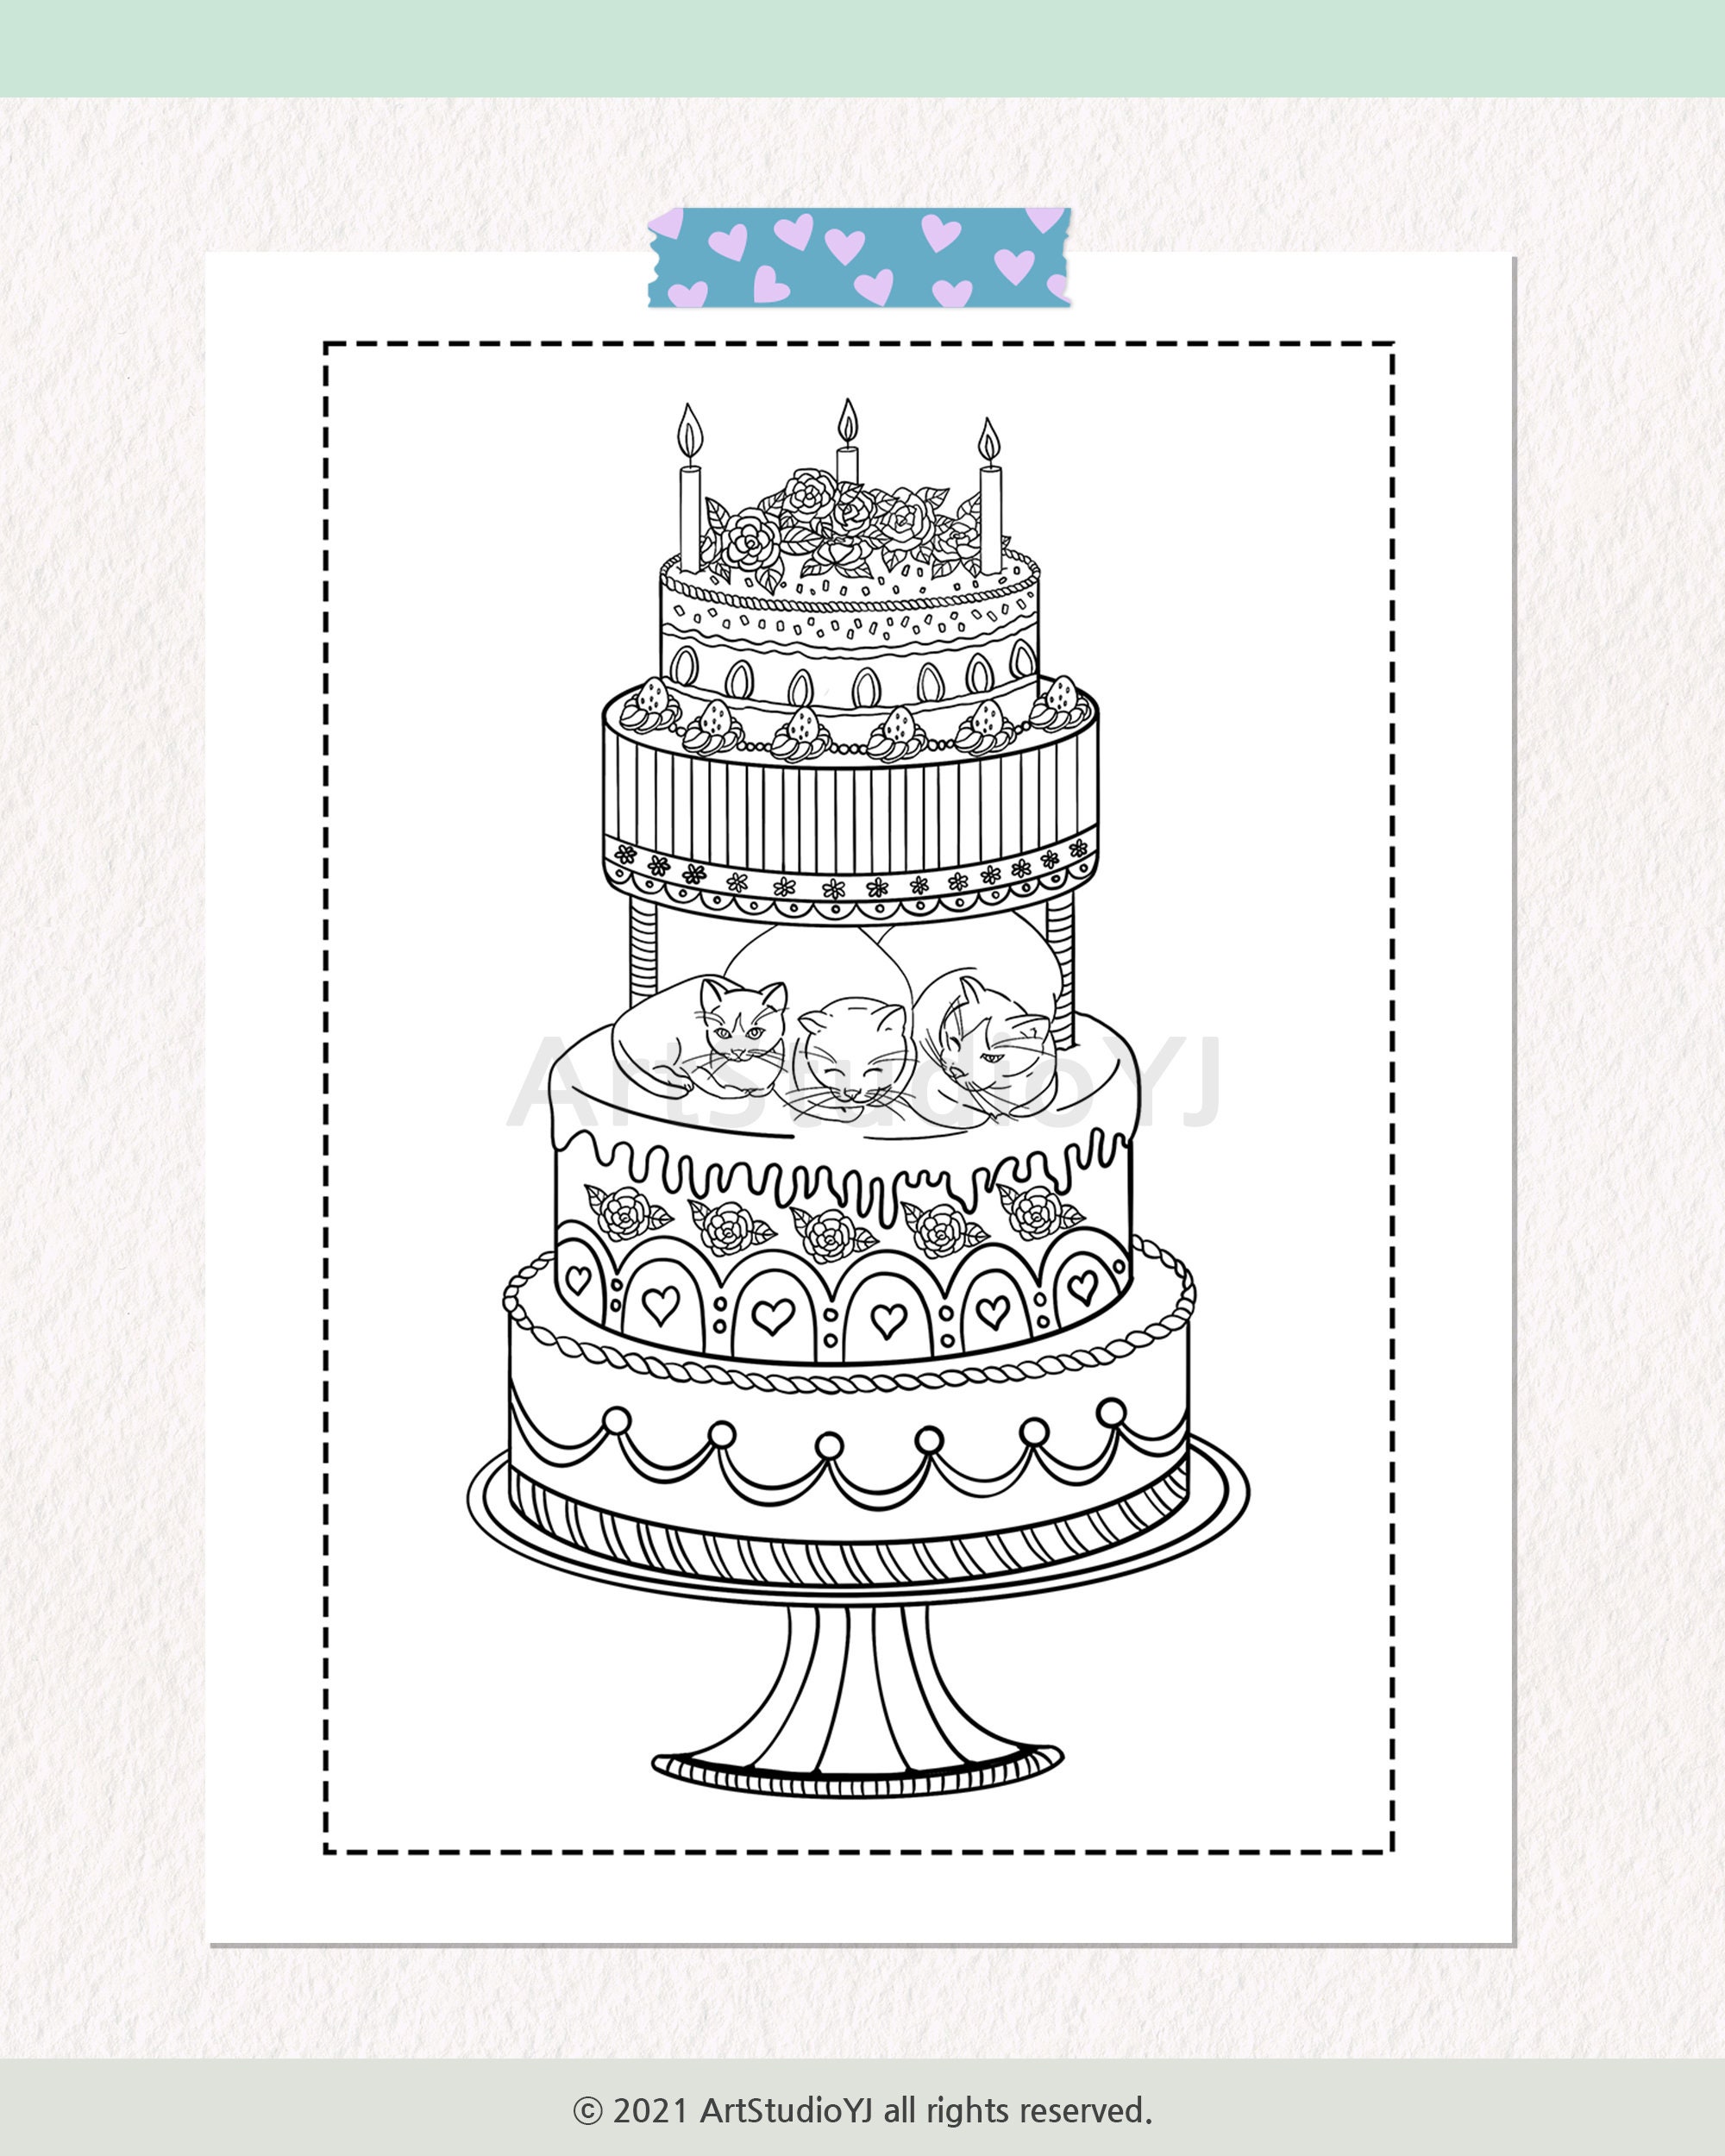 Cats Coloring Page Cake Cute Cat Coloring Page PDF JPEG | Etsy